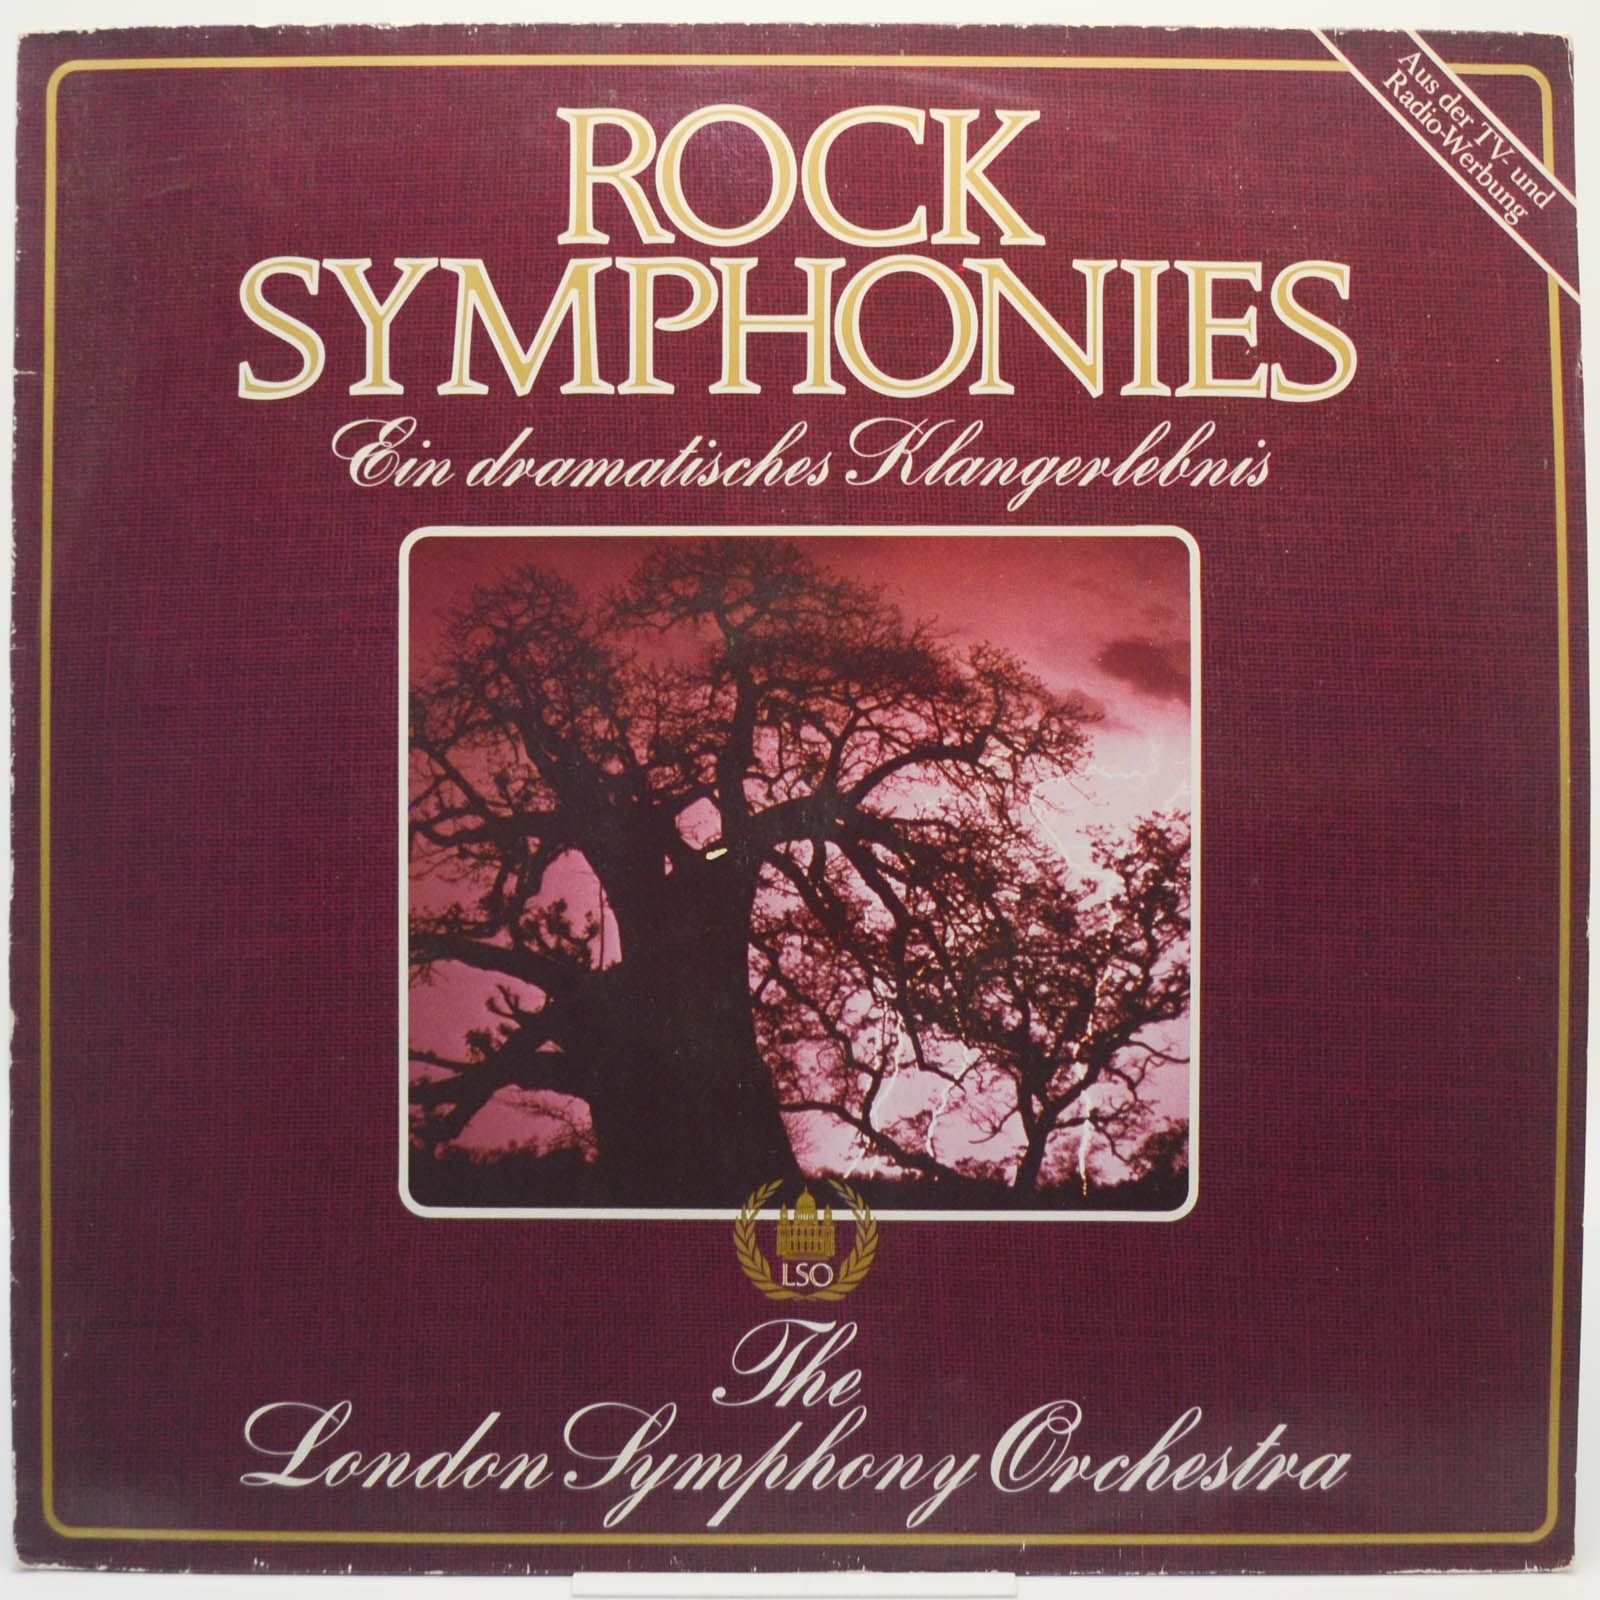 London Symphony Orchestra And The Royal Choral Society — Rock Symphonies - Ein Dramatisches Klangerlebnis, 1980